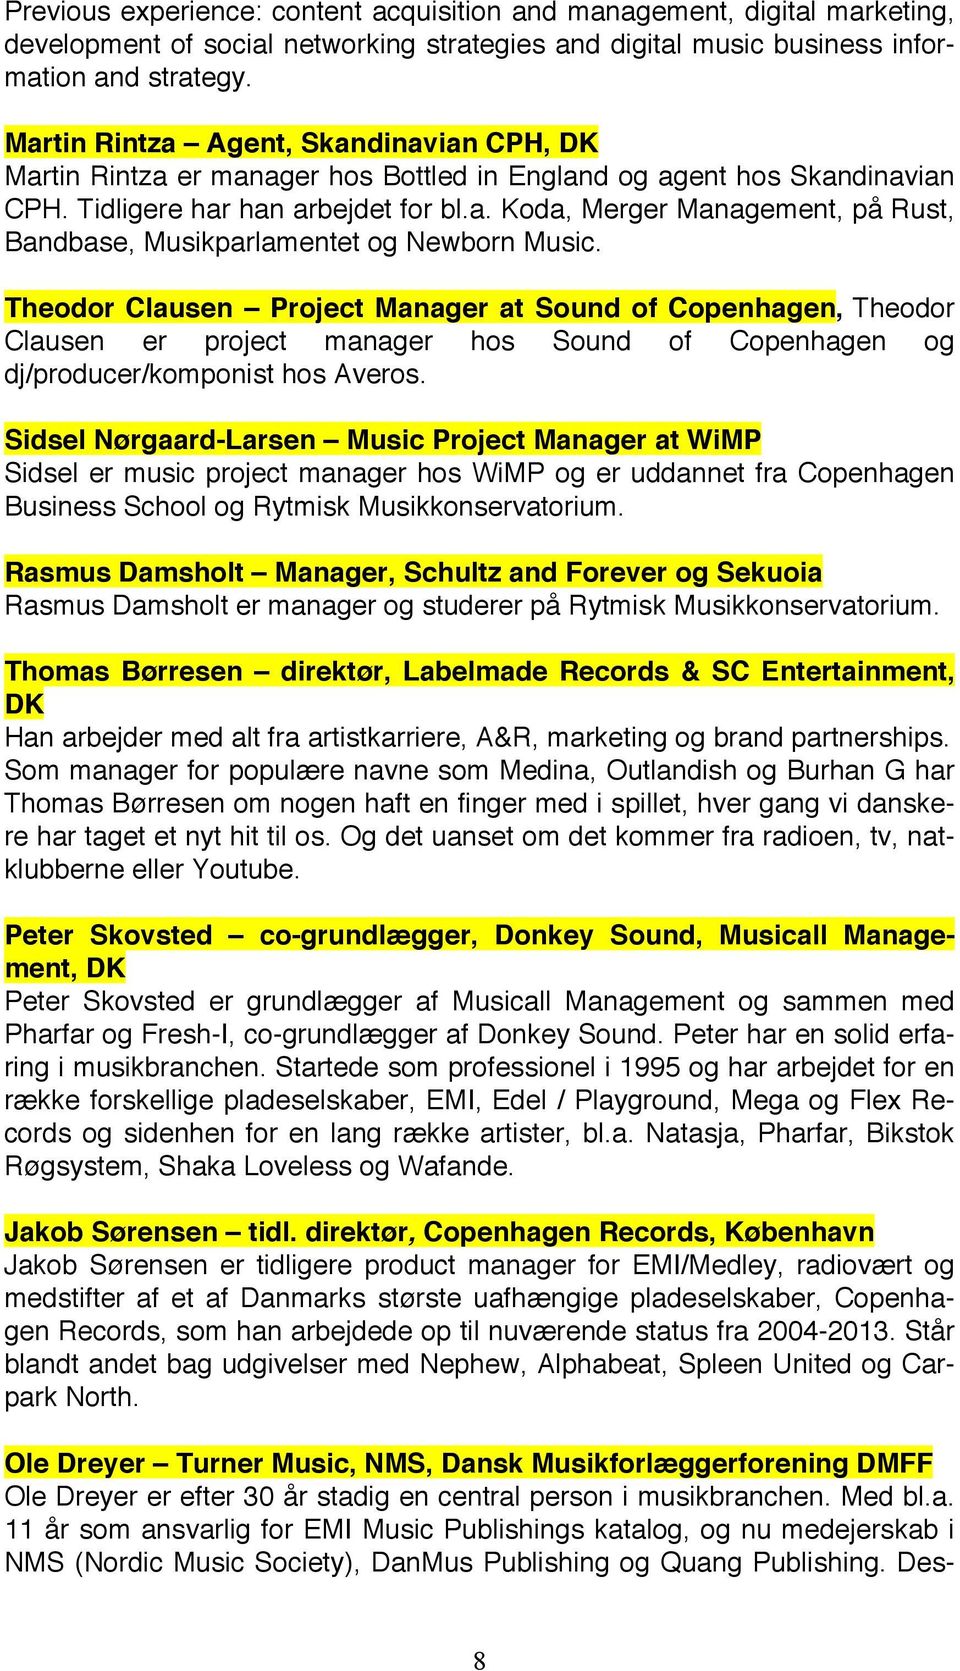 Theodor Clausen Project Manager at Sound of Copenhagen, Theodor Clausen er project manager hos Sound of Copenhagen og dj/producer/komponist hos Averos.